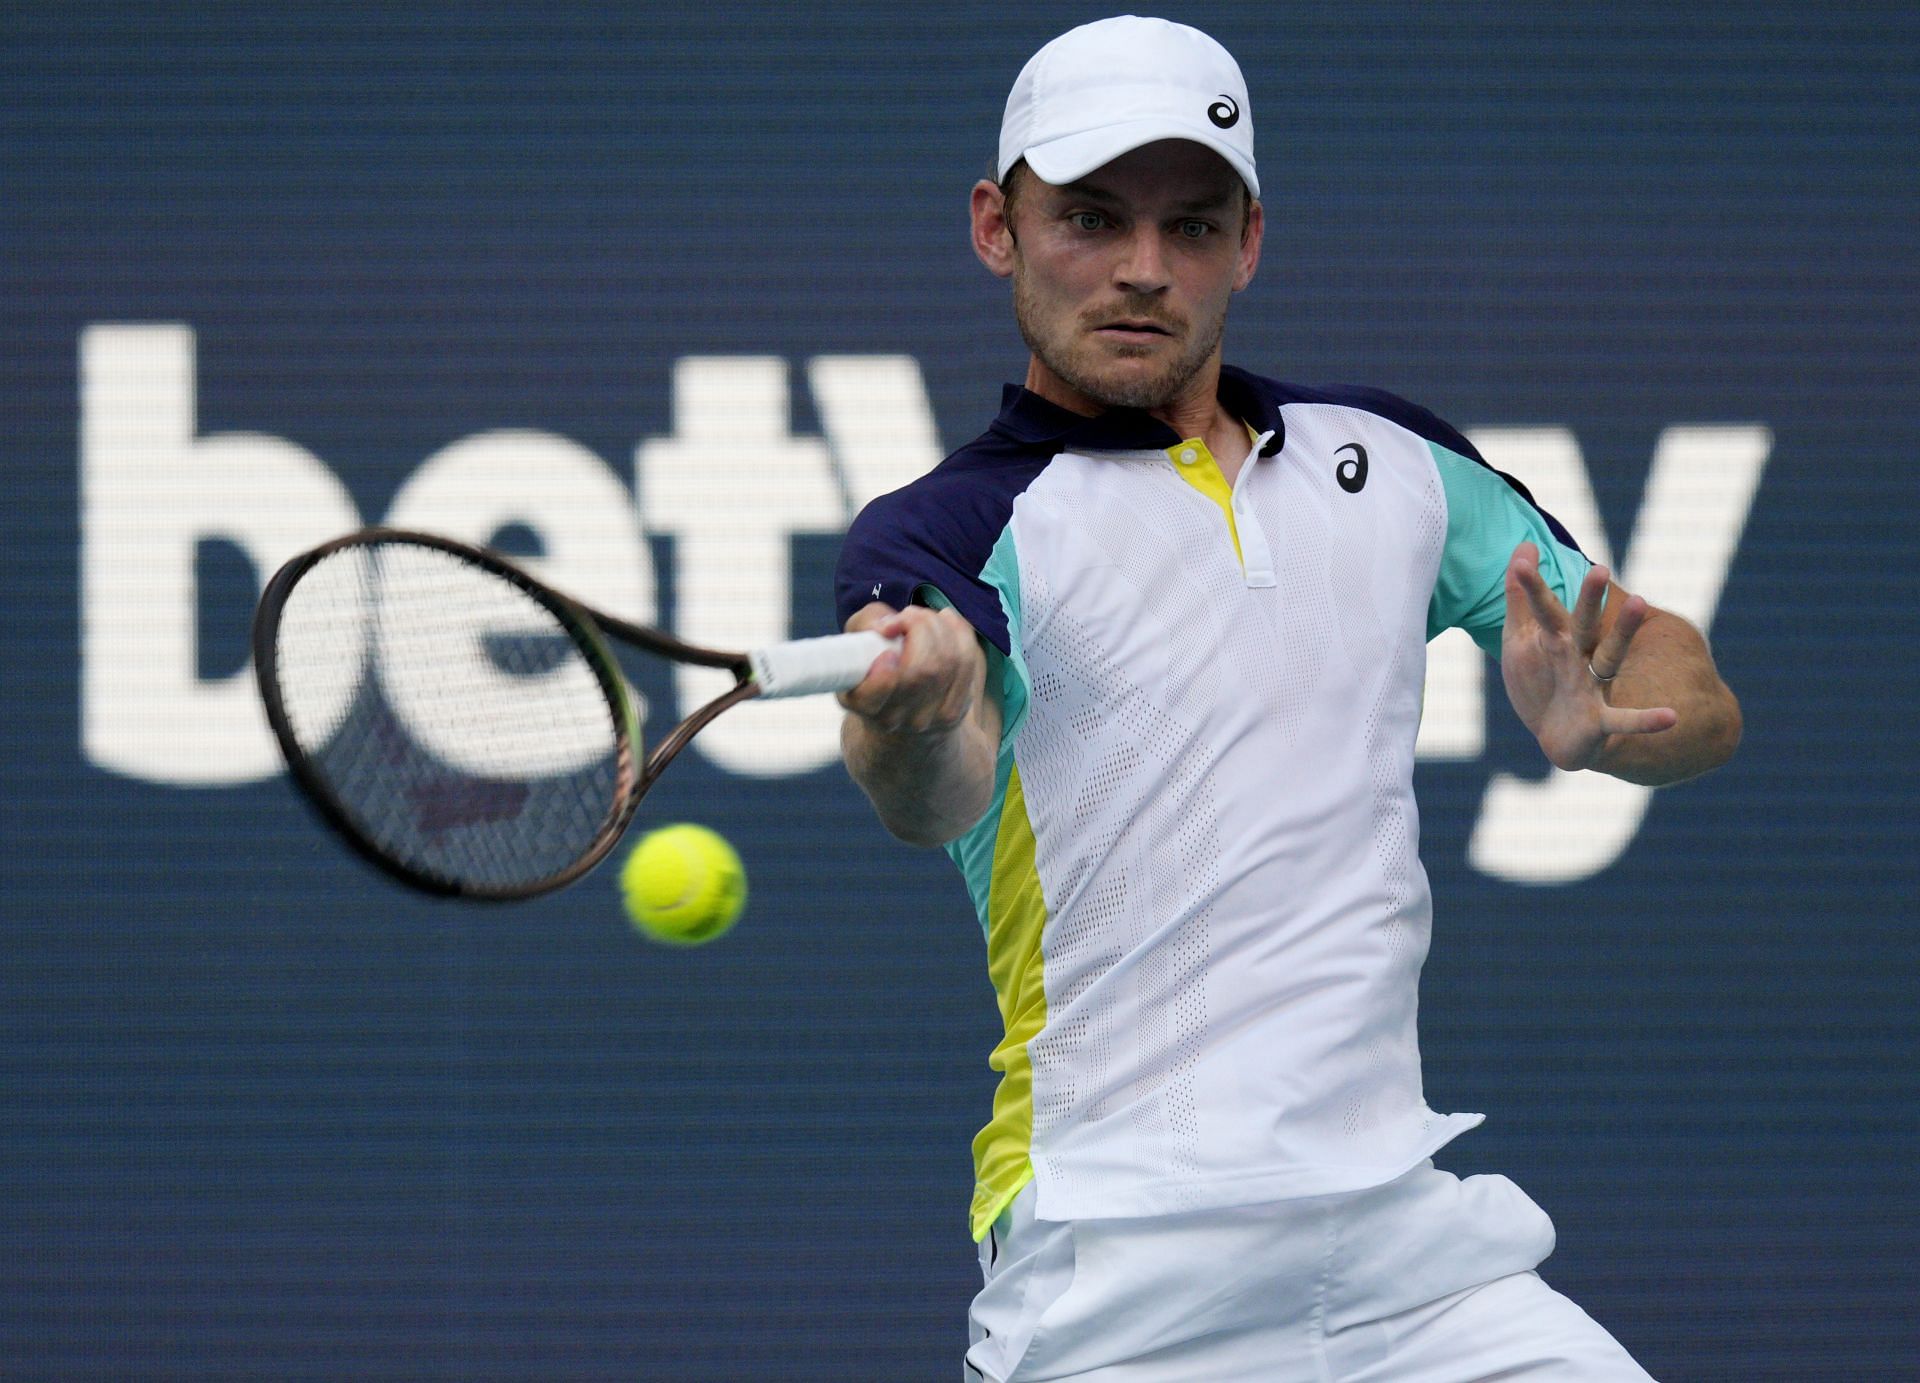 David Goffin has won 13 out of 24 matches this season